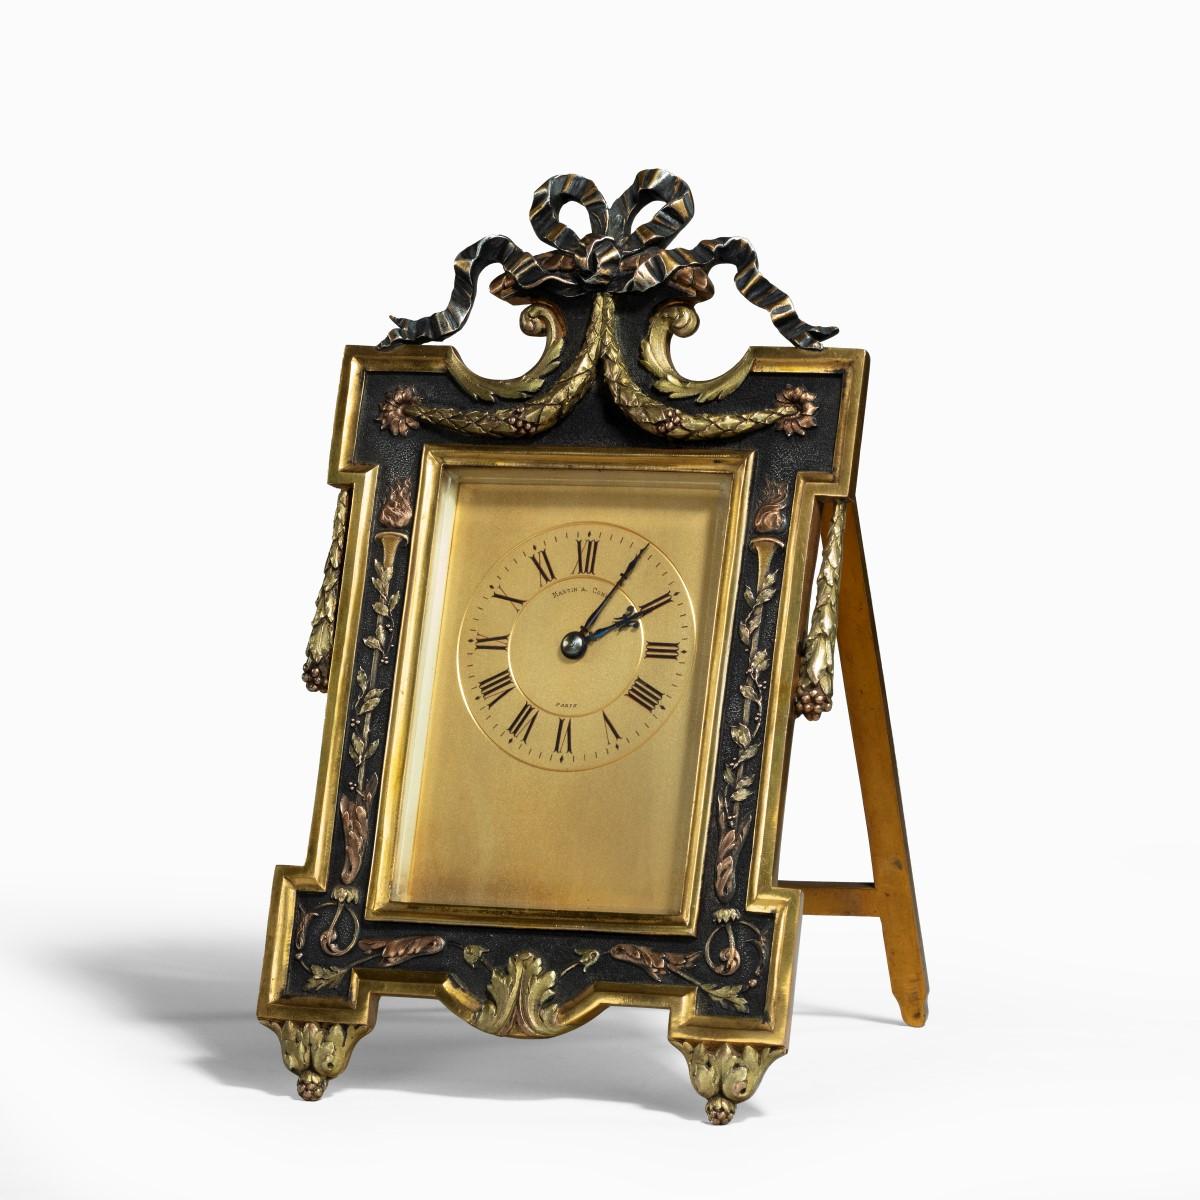 bronze easel clock by Martin Company